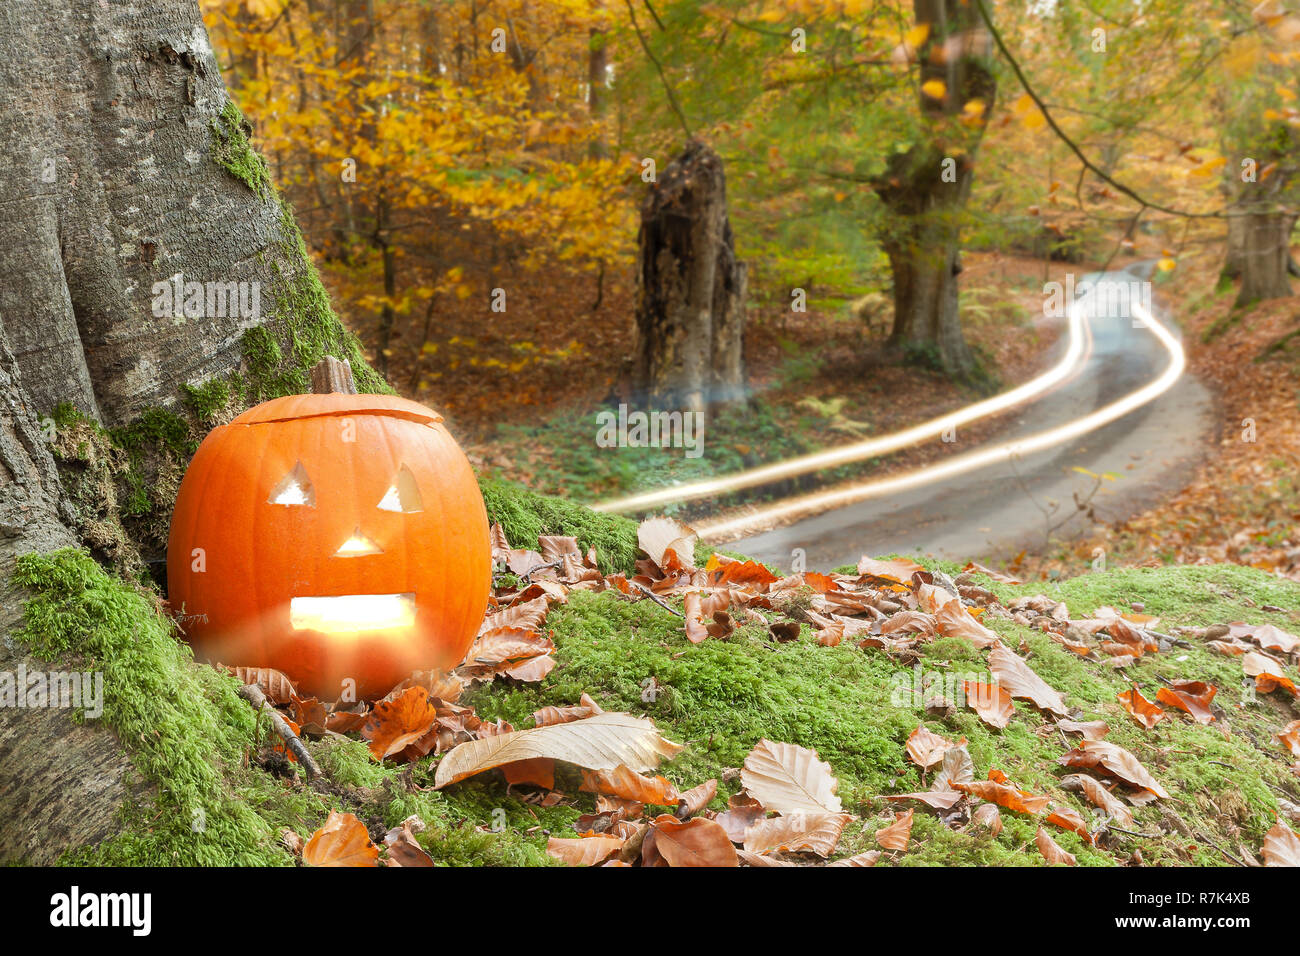 Autumn scene with scary orange pumpkin sat next to a tree and road. Long exposure car lights in the background with fallen autumn leaves Stock Photo